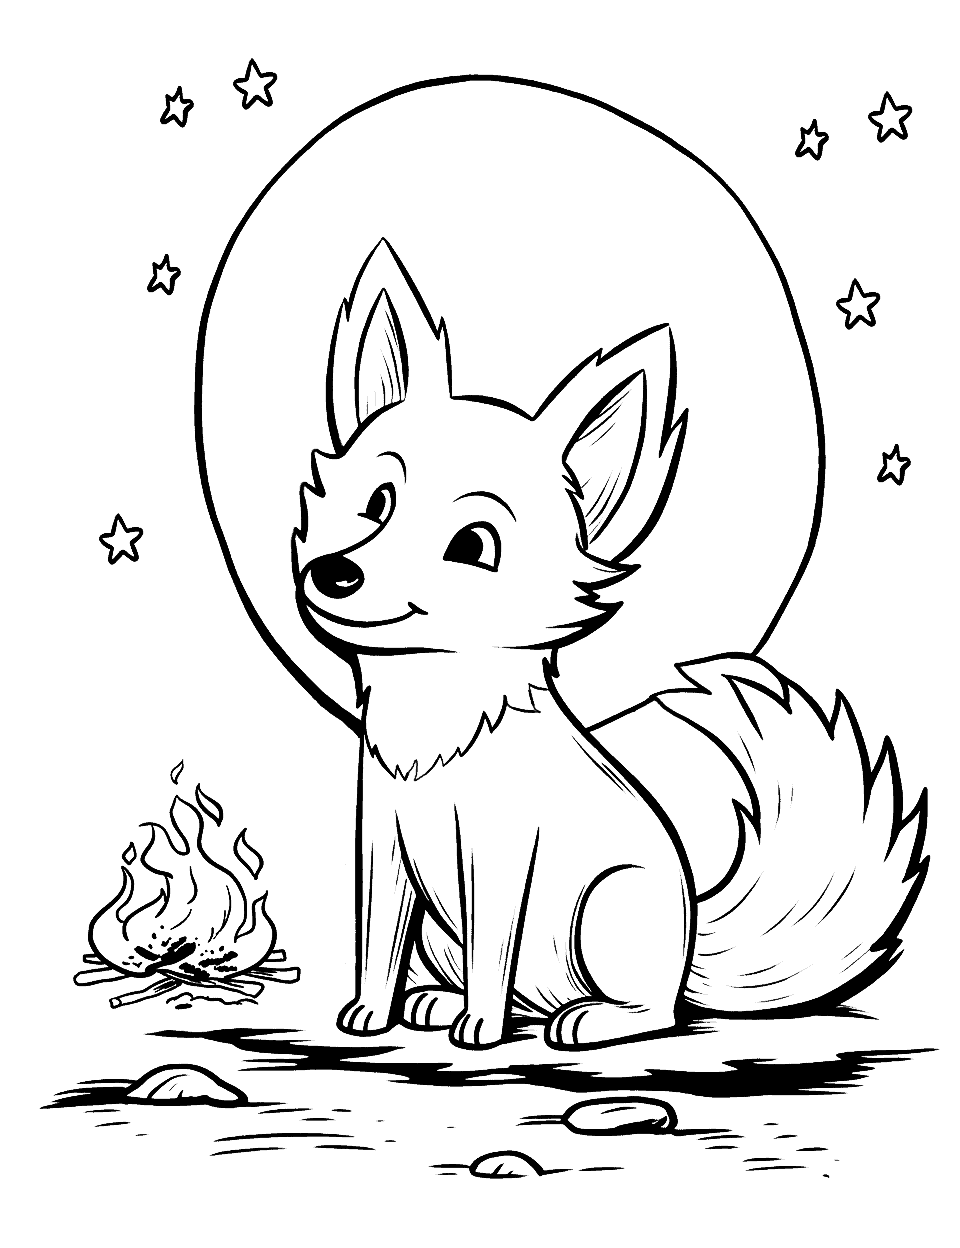 Fox's Campfire Night Fox Coloring Page - Under the stars, a fox by a warm campfire.